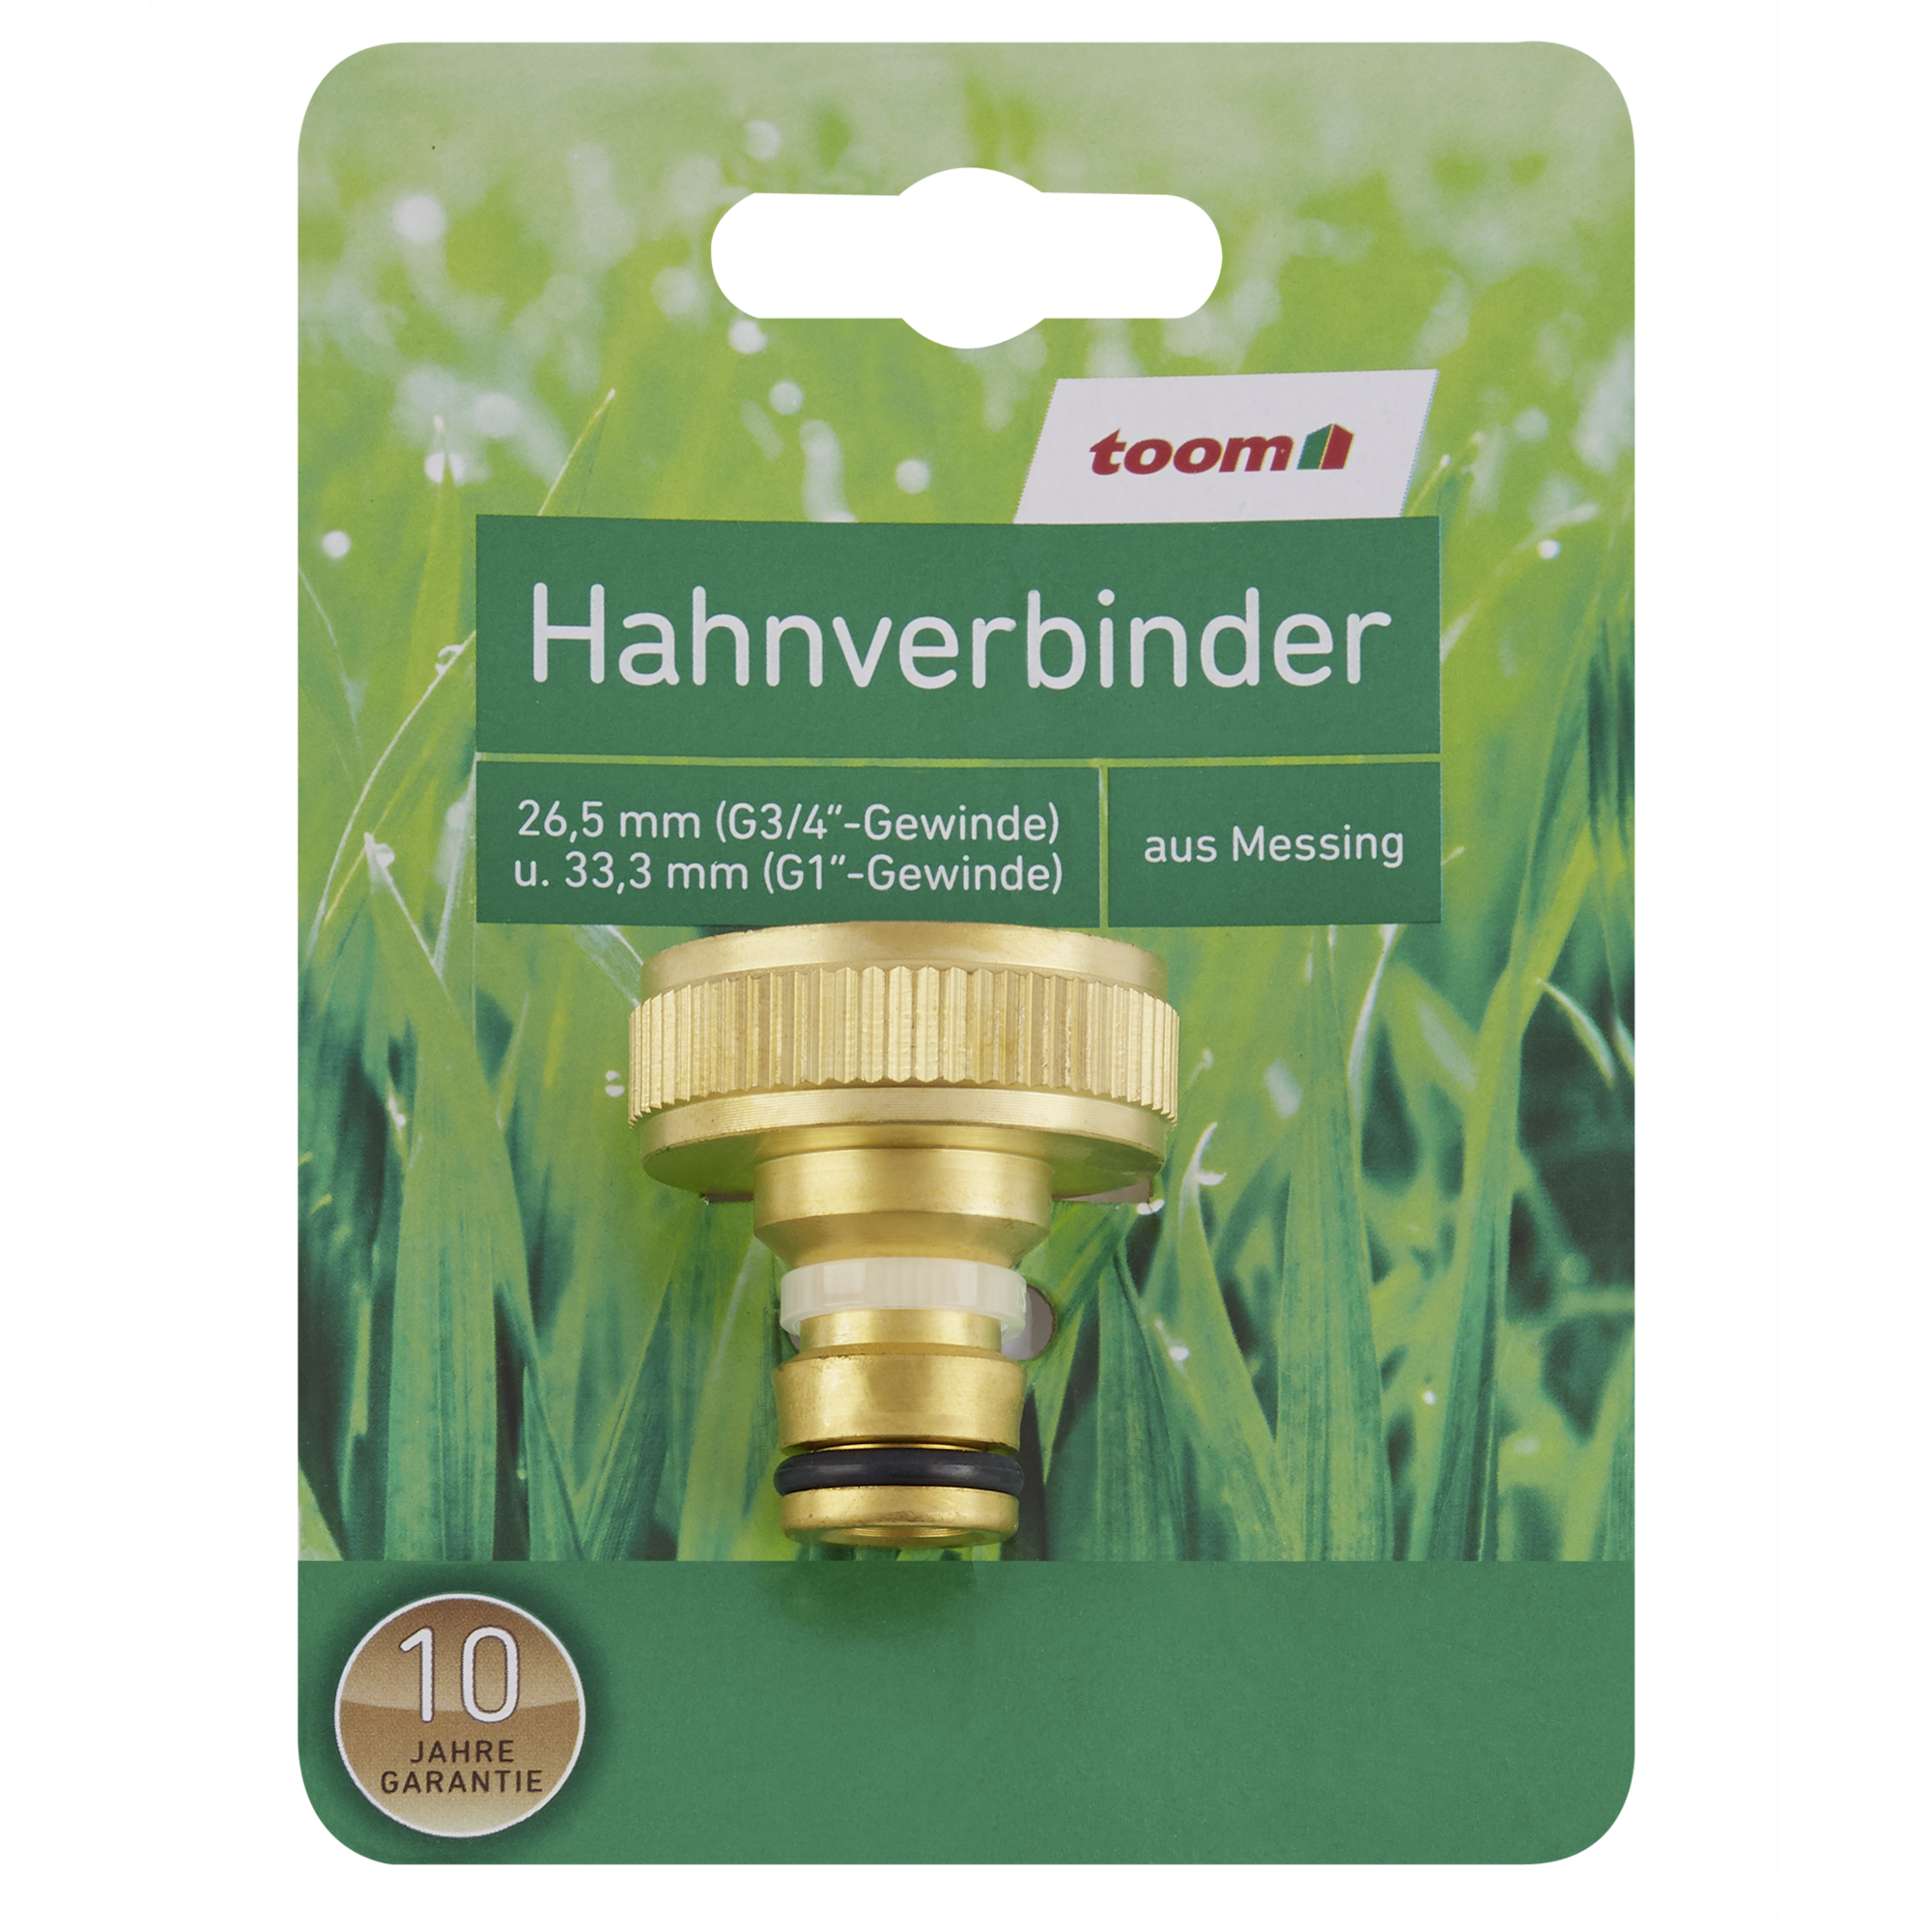 Hahnverbinder 26,5 mm und 33,3 mm + product picture